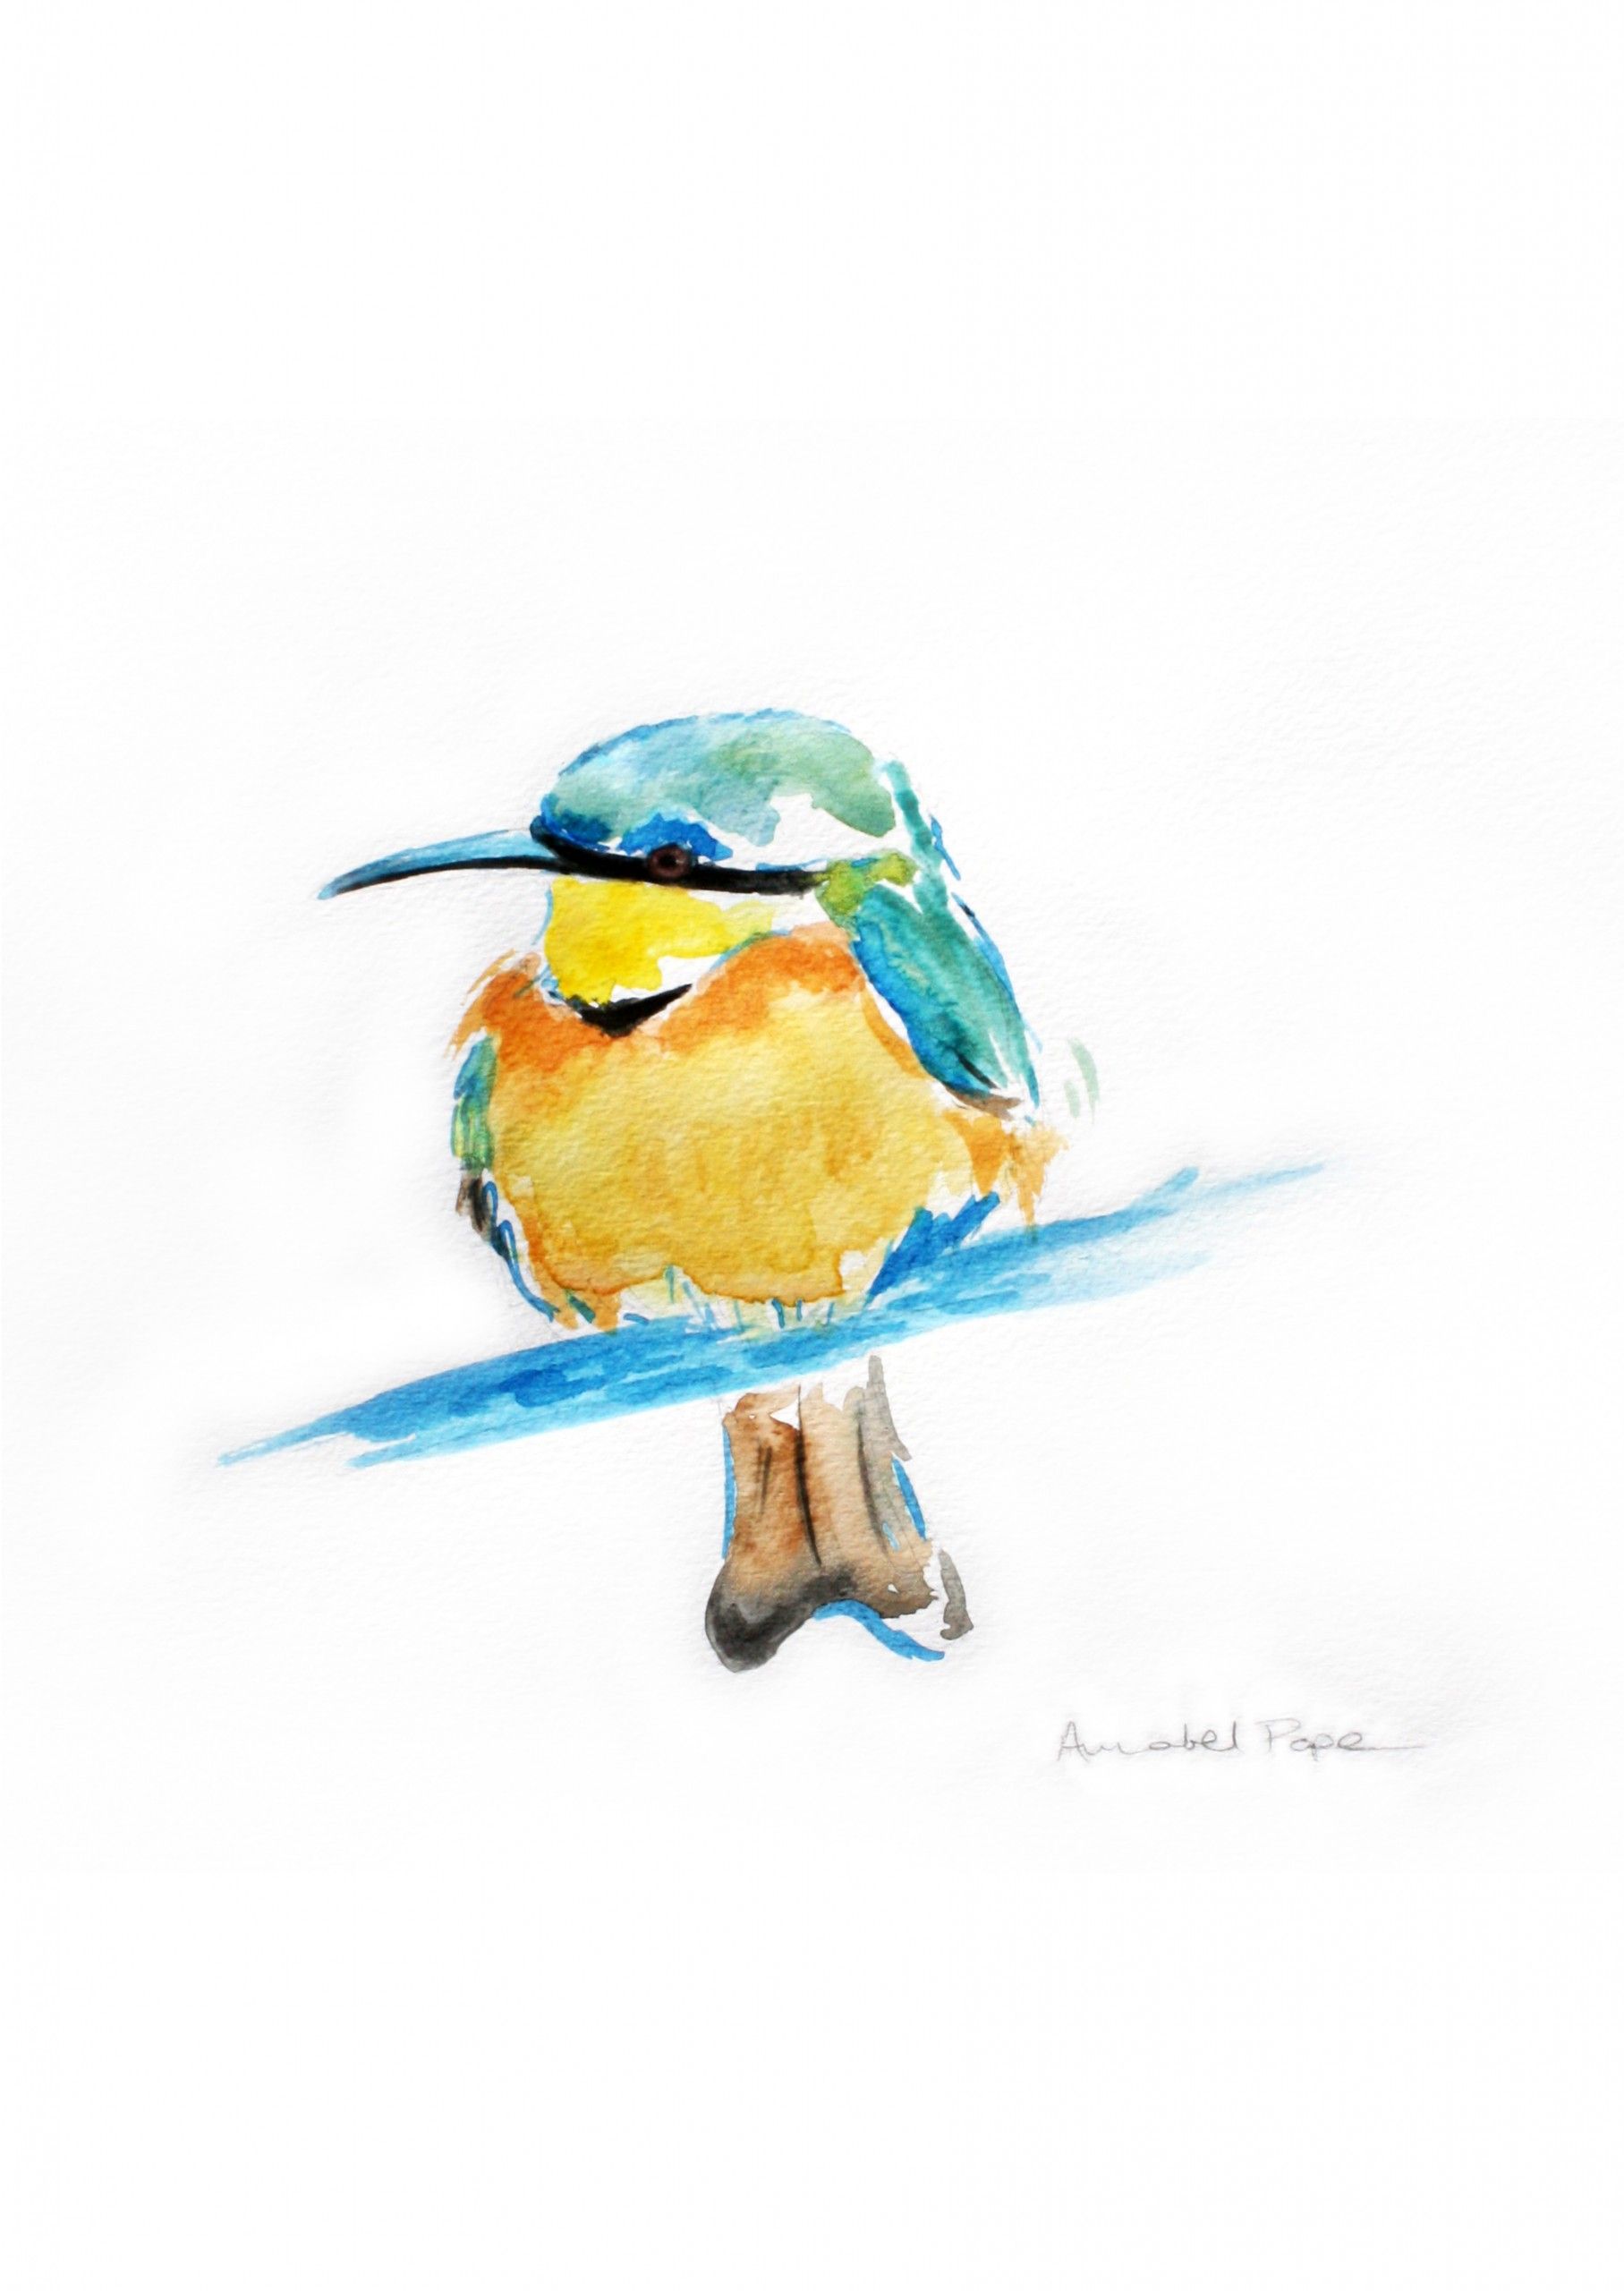 Little Bee-eater by Annabel Pope